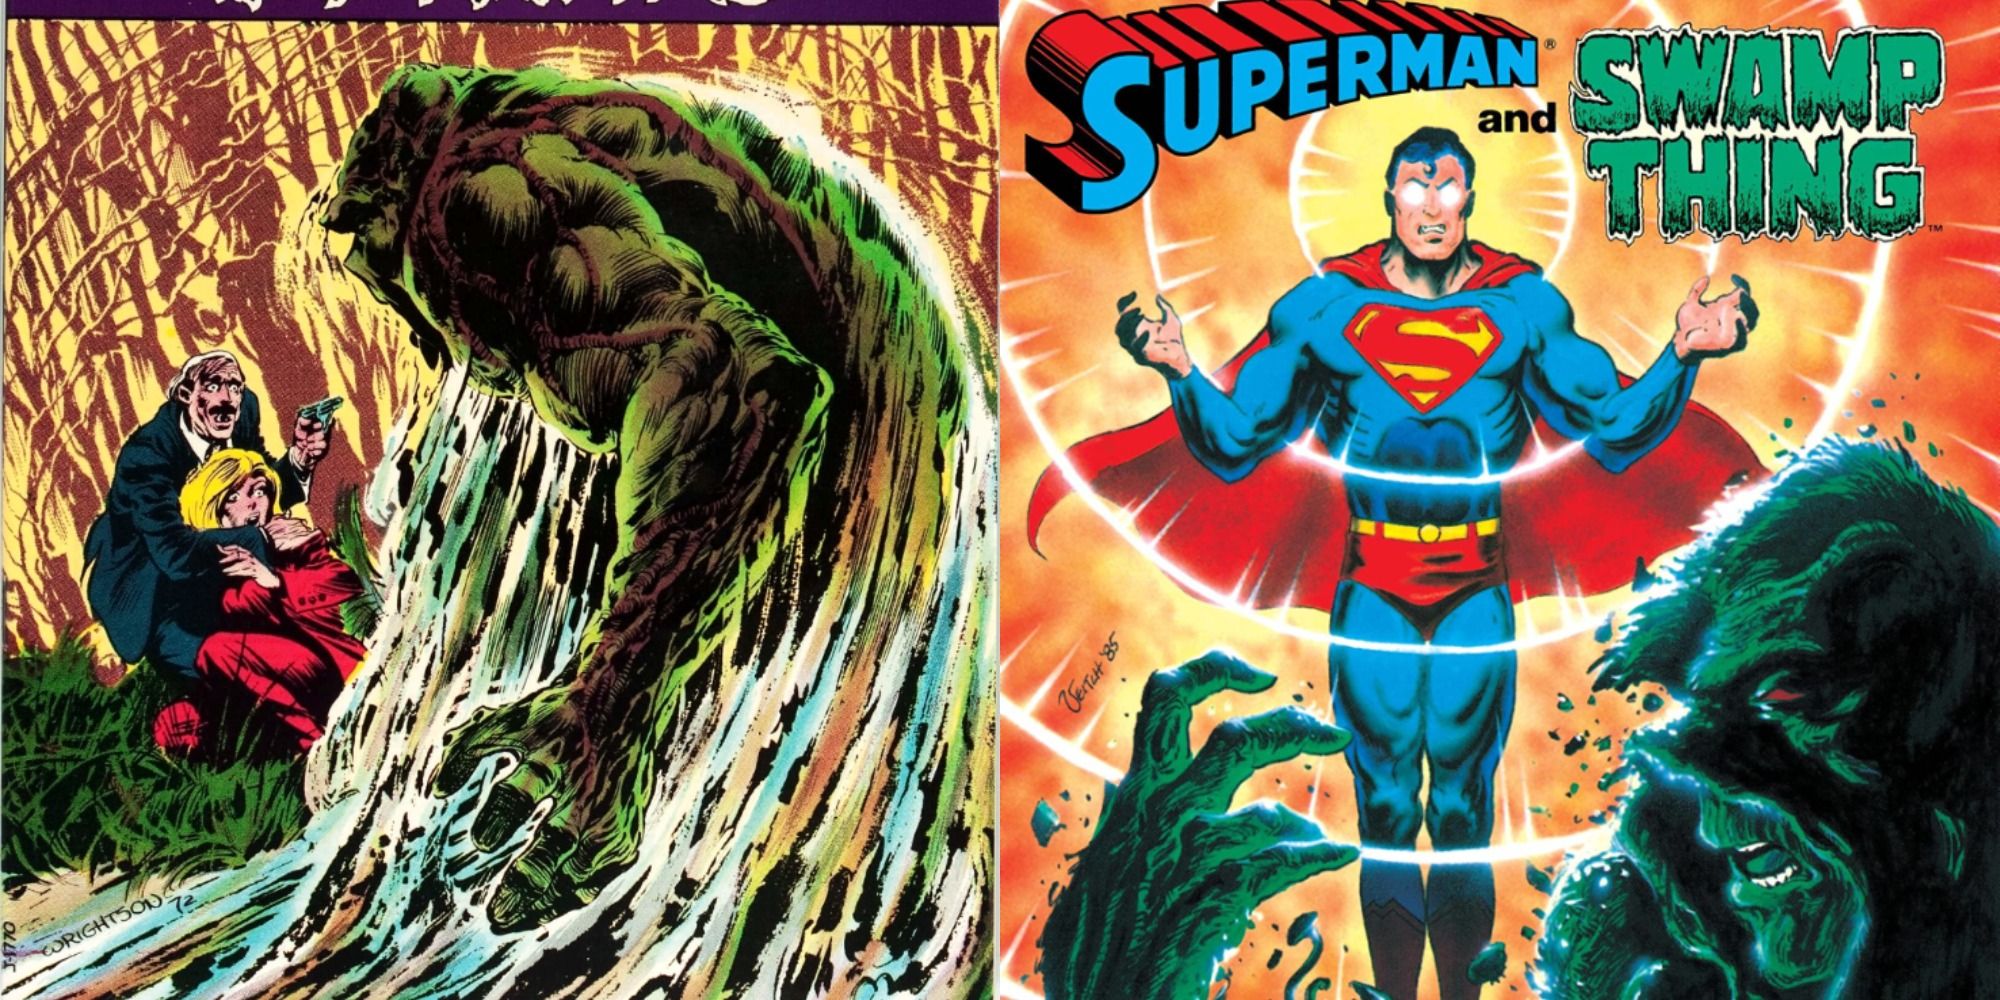 Split image showing the covers for Swamp Thing #1 and #21